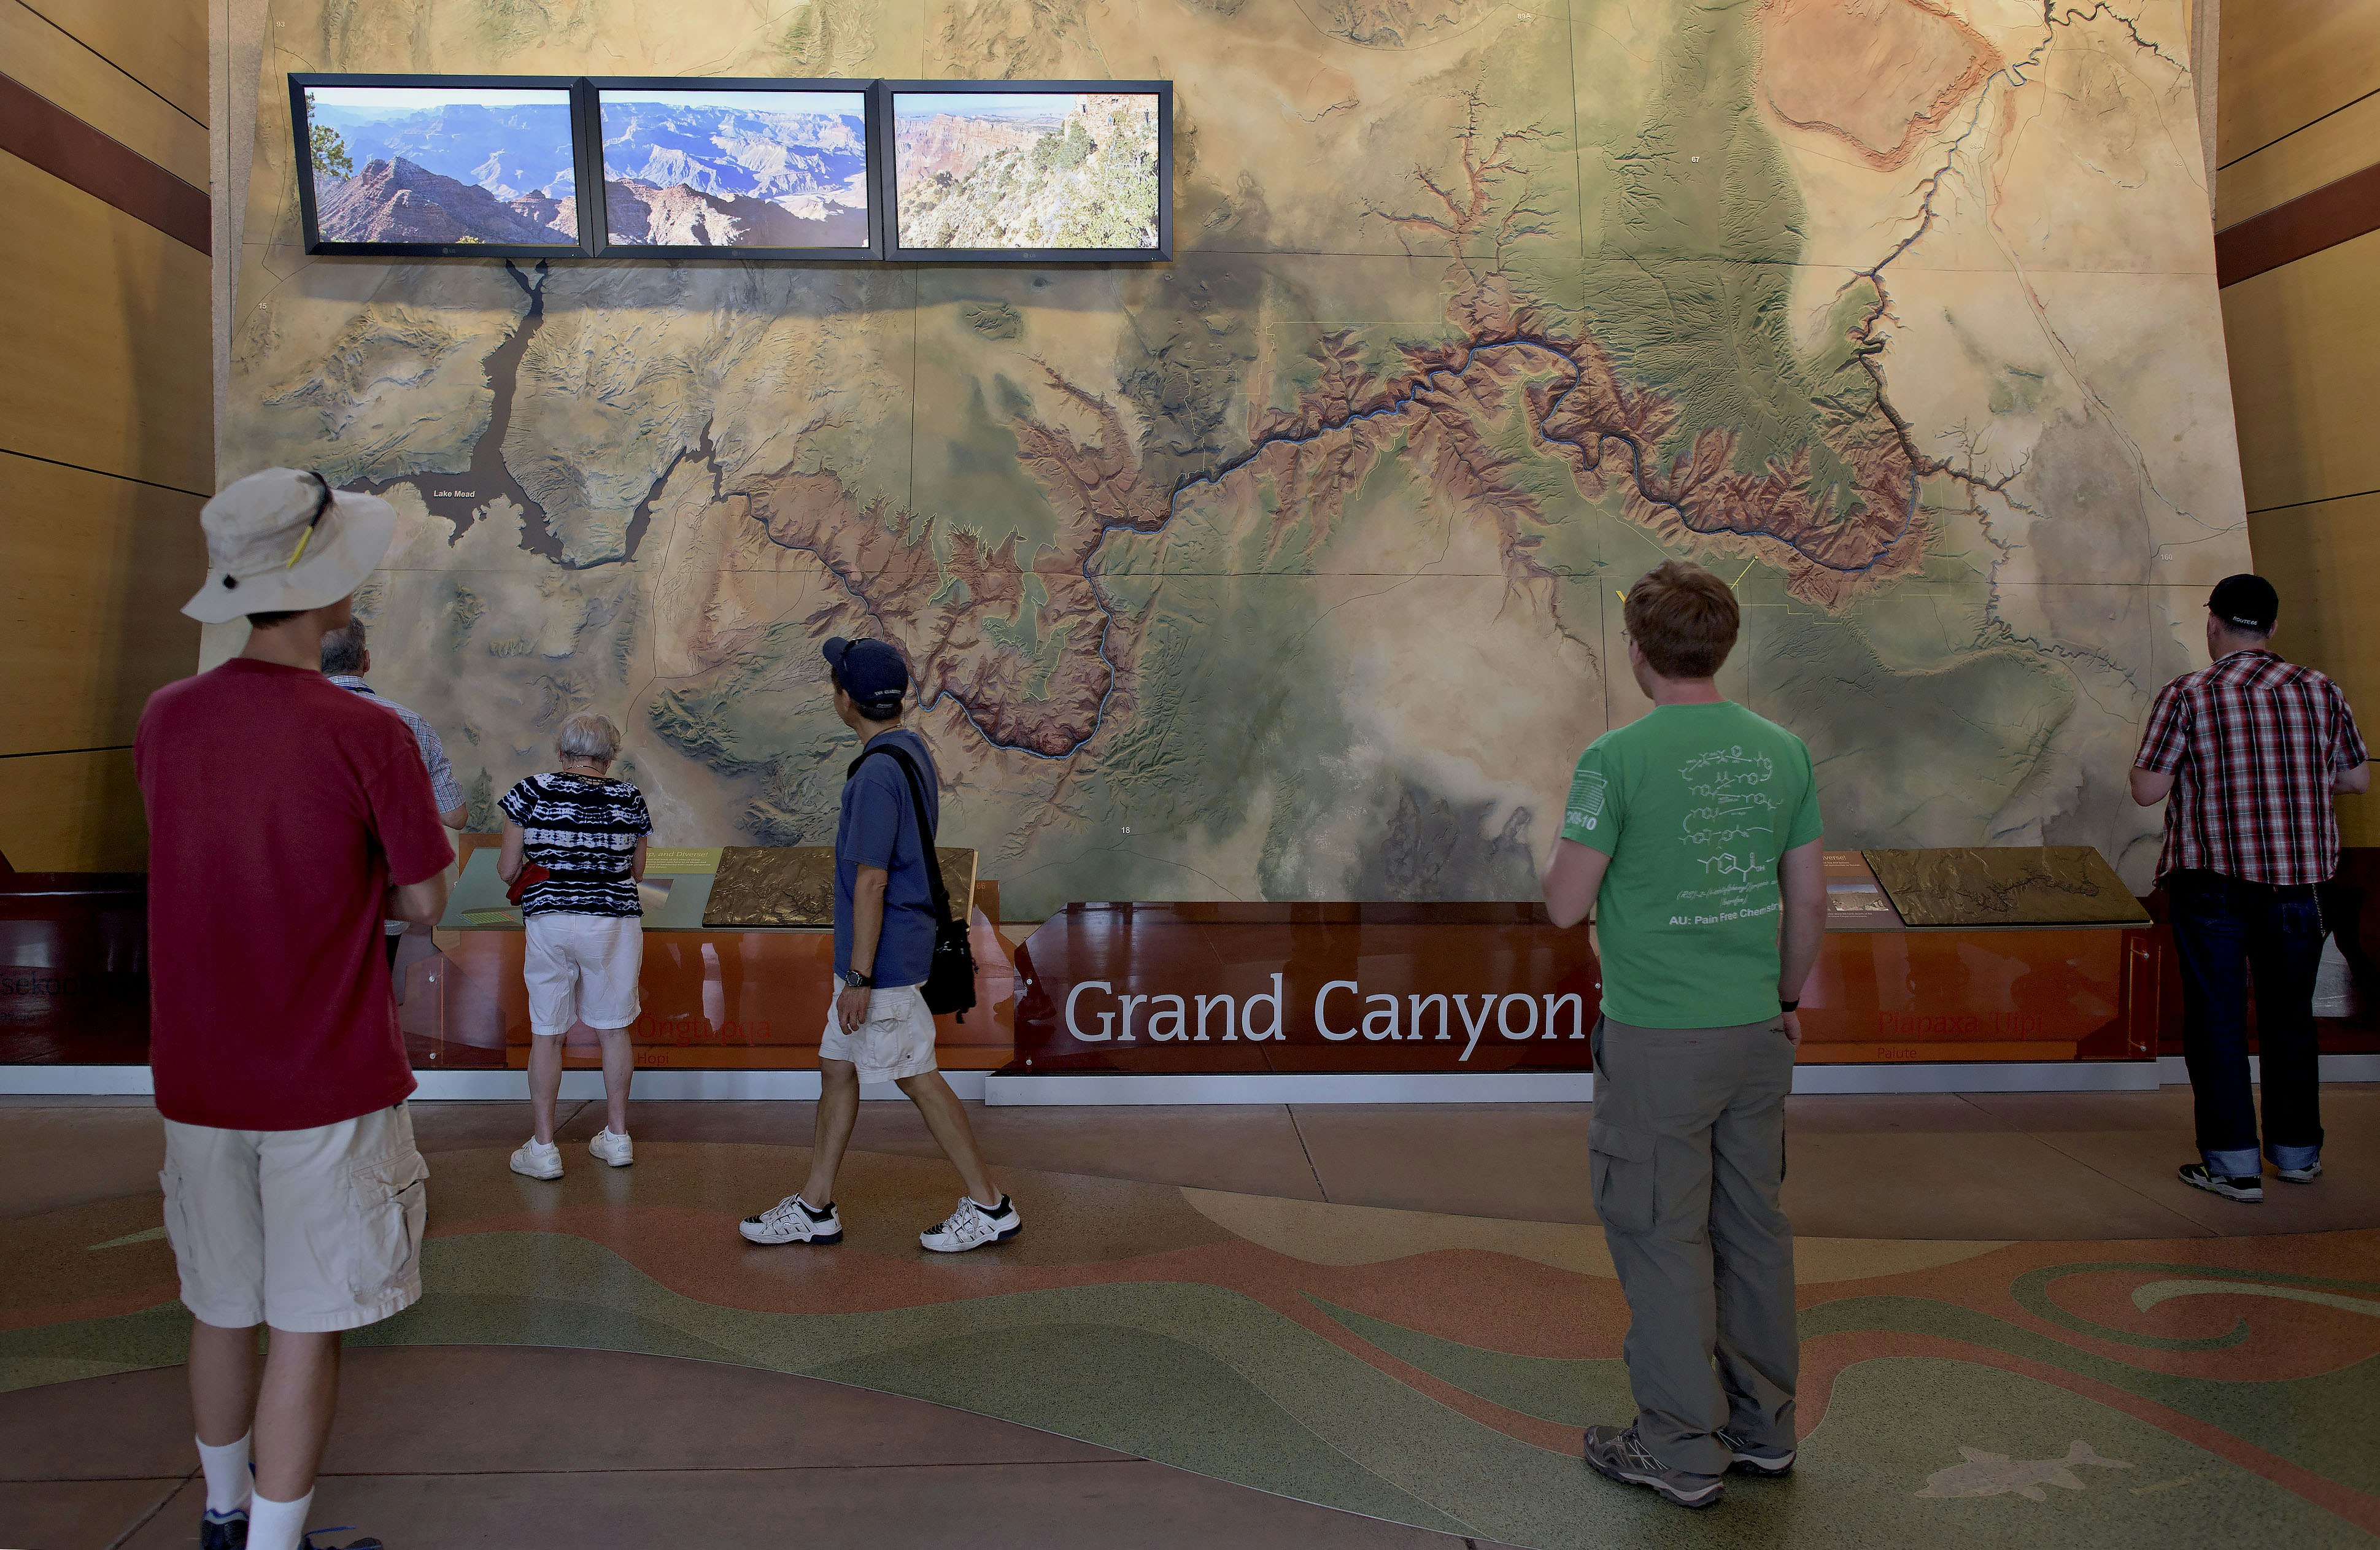 Six tourists stand in front of a large, wall-sized topographic map of the Grand Canyon with three television screens in its upper left corner to show footage of the park. On the floor, an abstract design in the same earth-tone shades of green, sage, orange-red, and buff as the map swirl in stone composite on the floor.